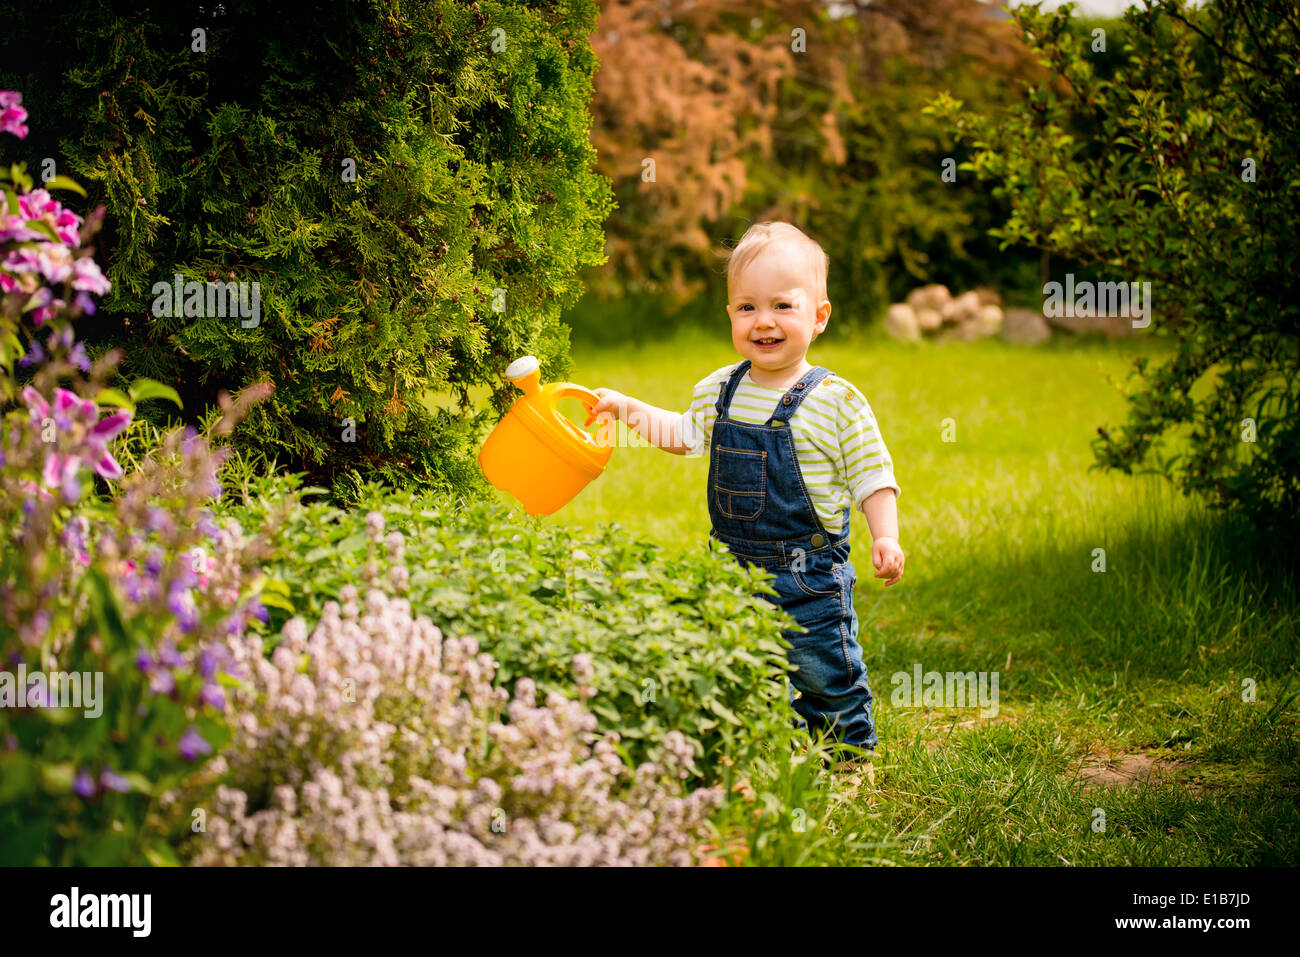 Little baby girl waters plants in backyard garden with watering can Stock Photo